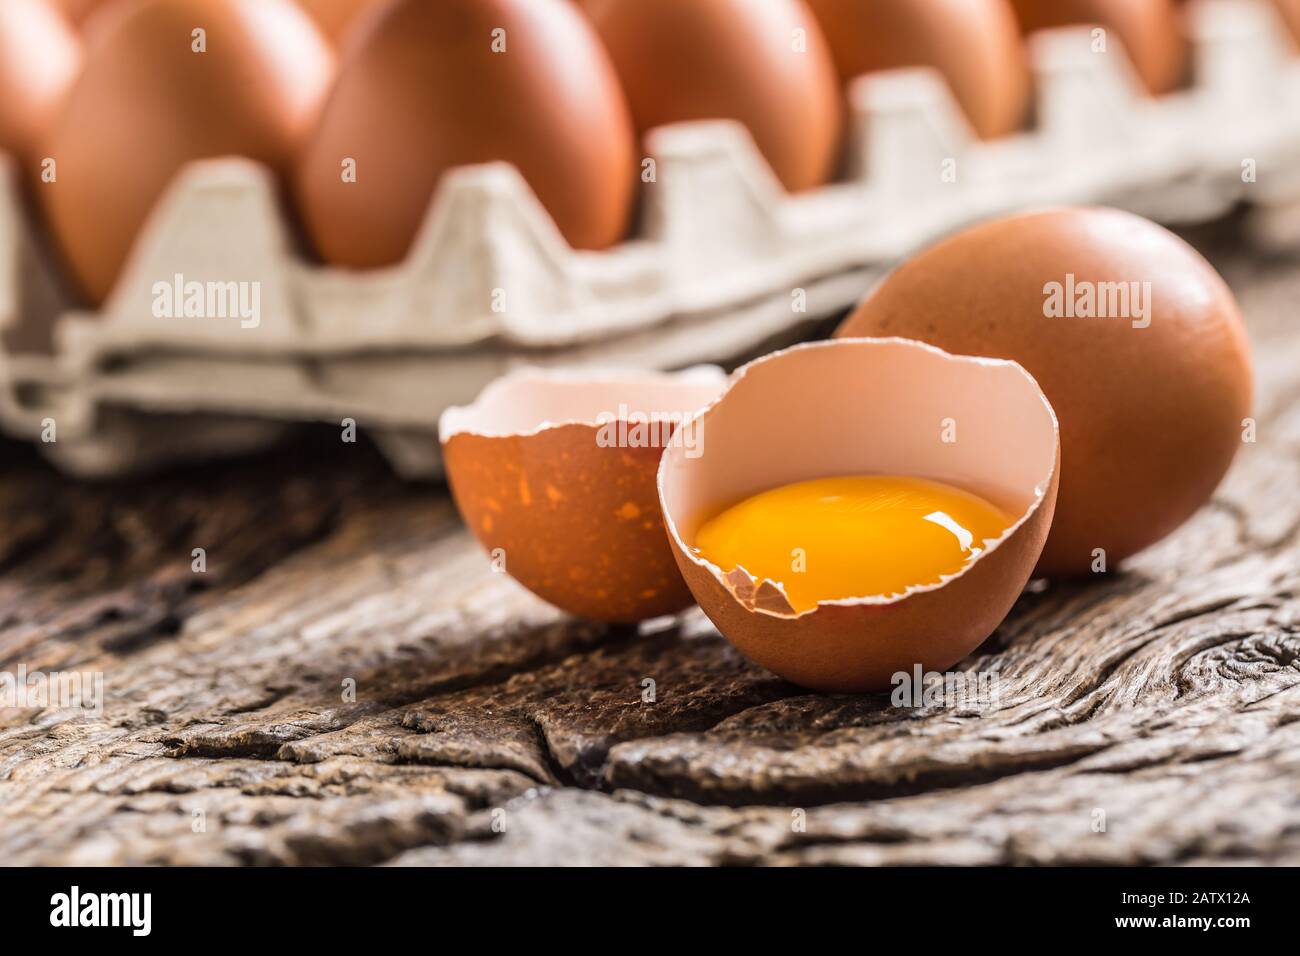 Chicken eggs in carton box on rustic wooden table Stock Photo